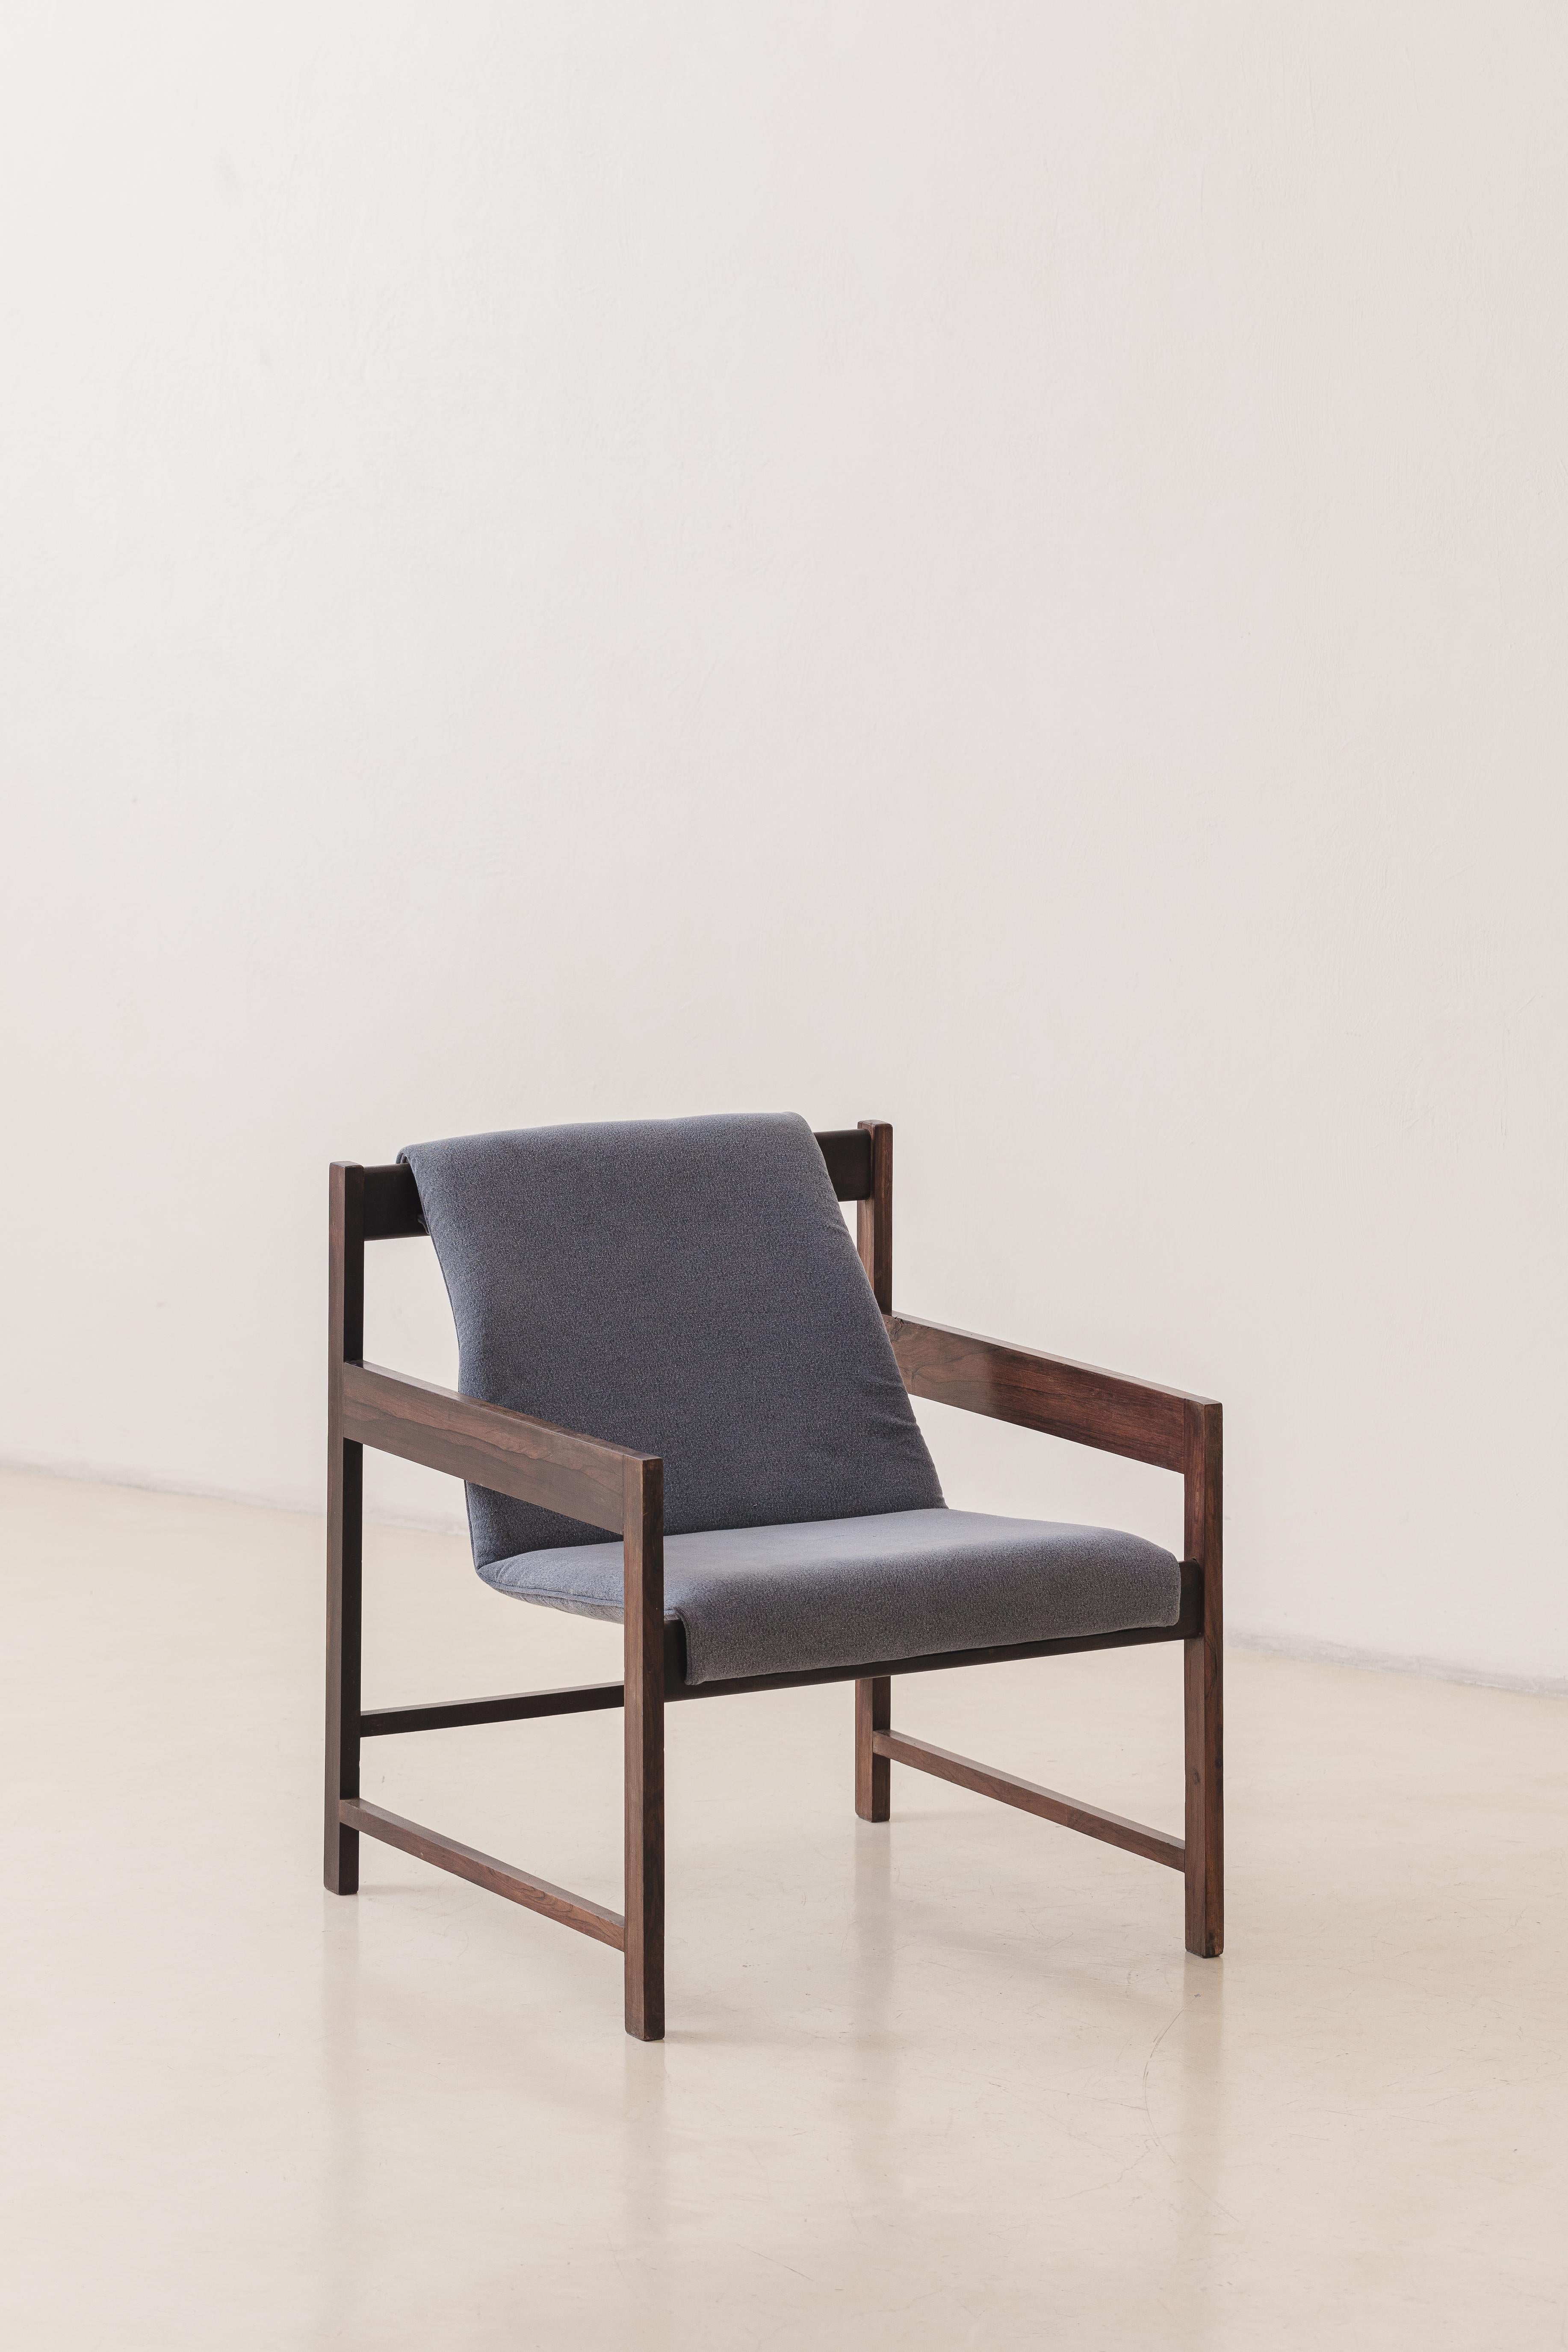 Painted Lia Armchair Design by Sergio Rodrigues, Rosewood, Mid-Century Modern, Oca 1960s For Sale